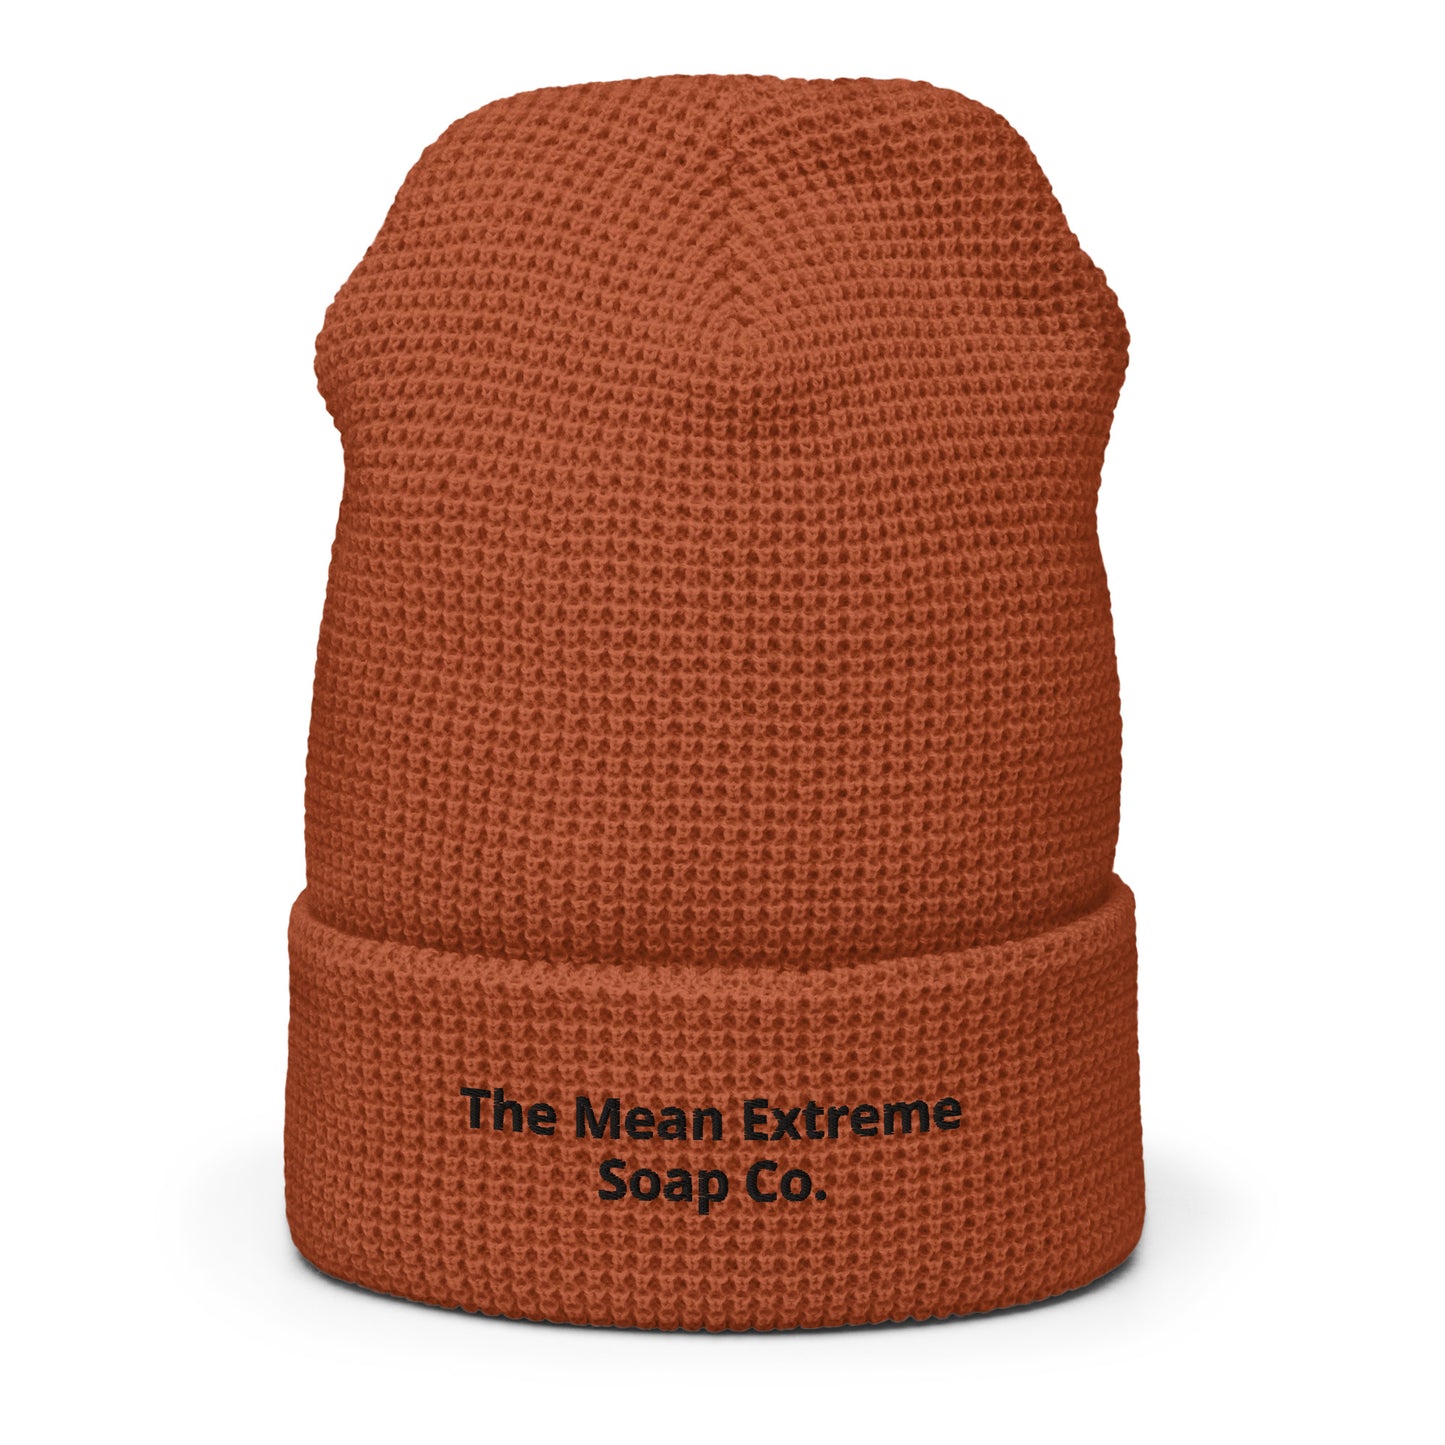 The Mean Extreme Waffle Weave Beanie